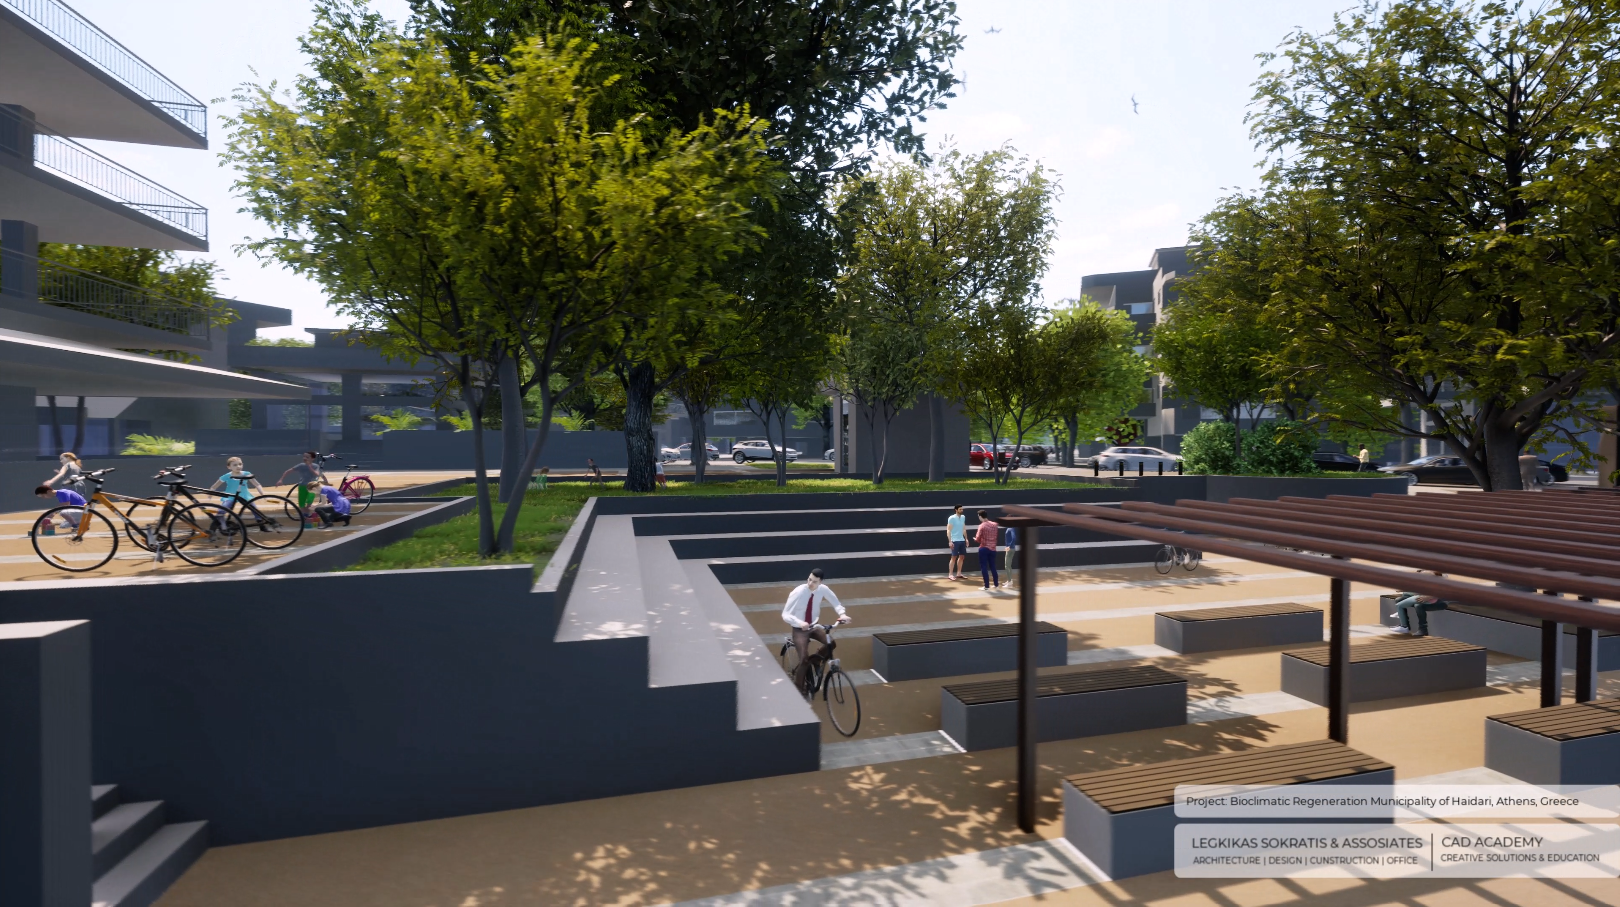 Bioclimatic Regeneration- Urban Design Project in Greece using Rhino and Lands Design software (10)